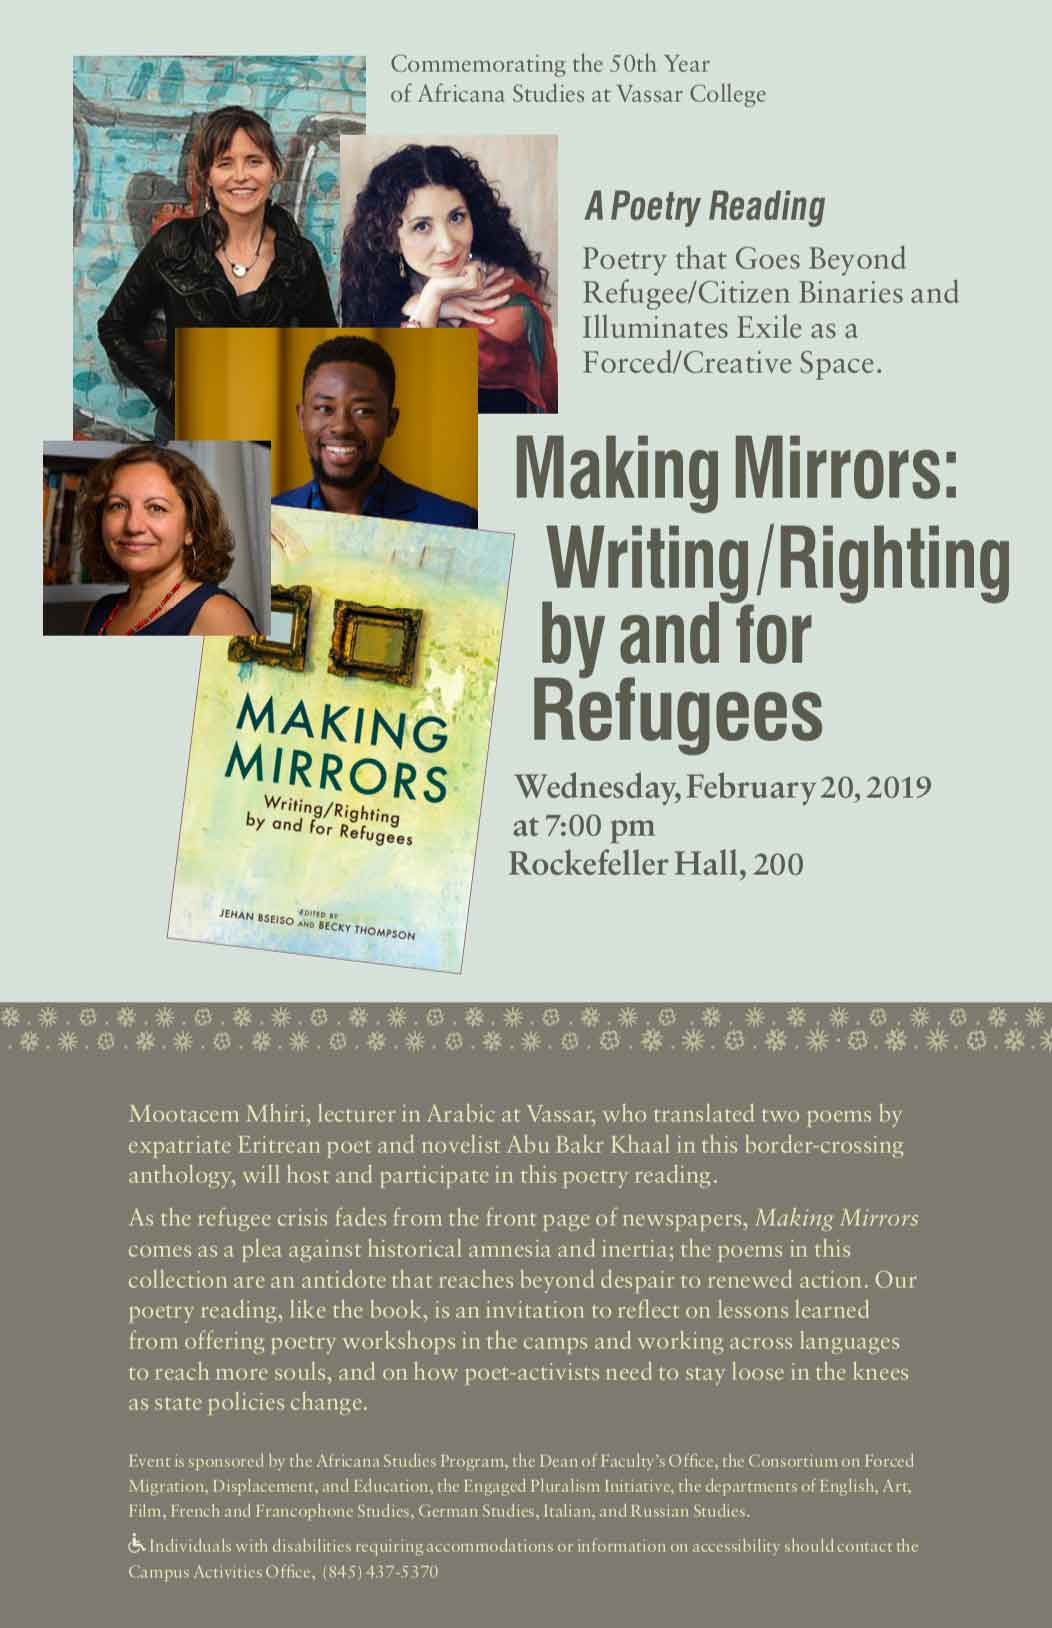 Making Mirrors event poster